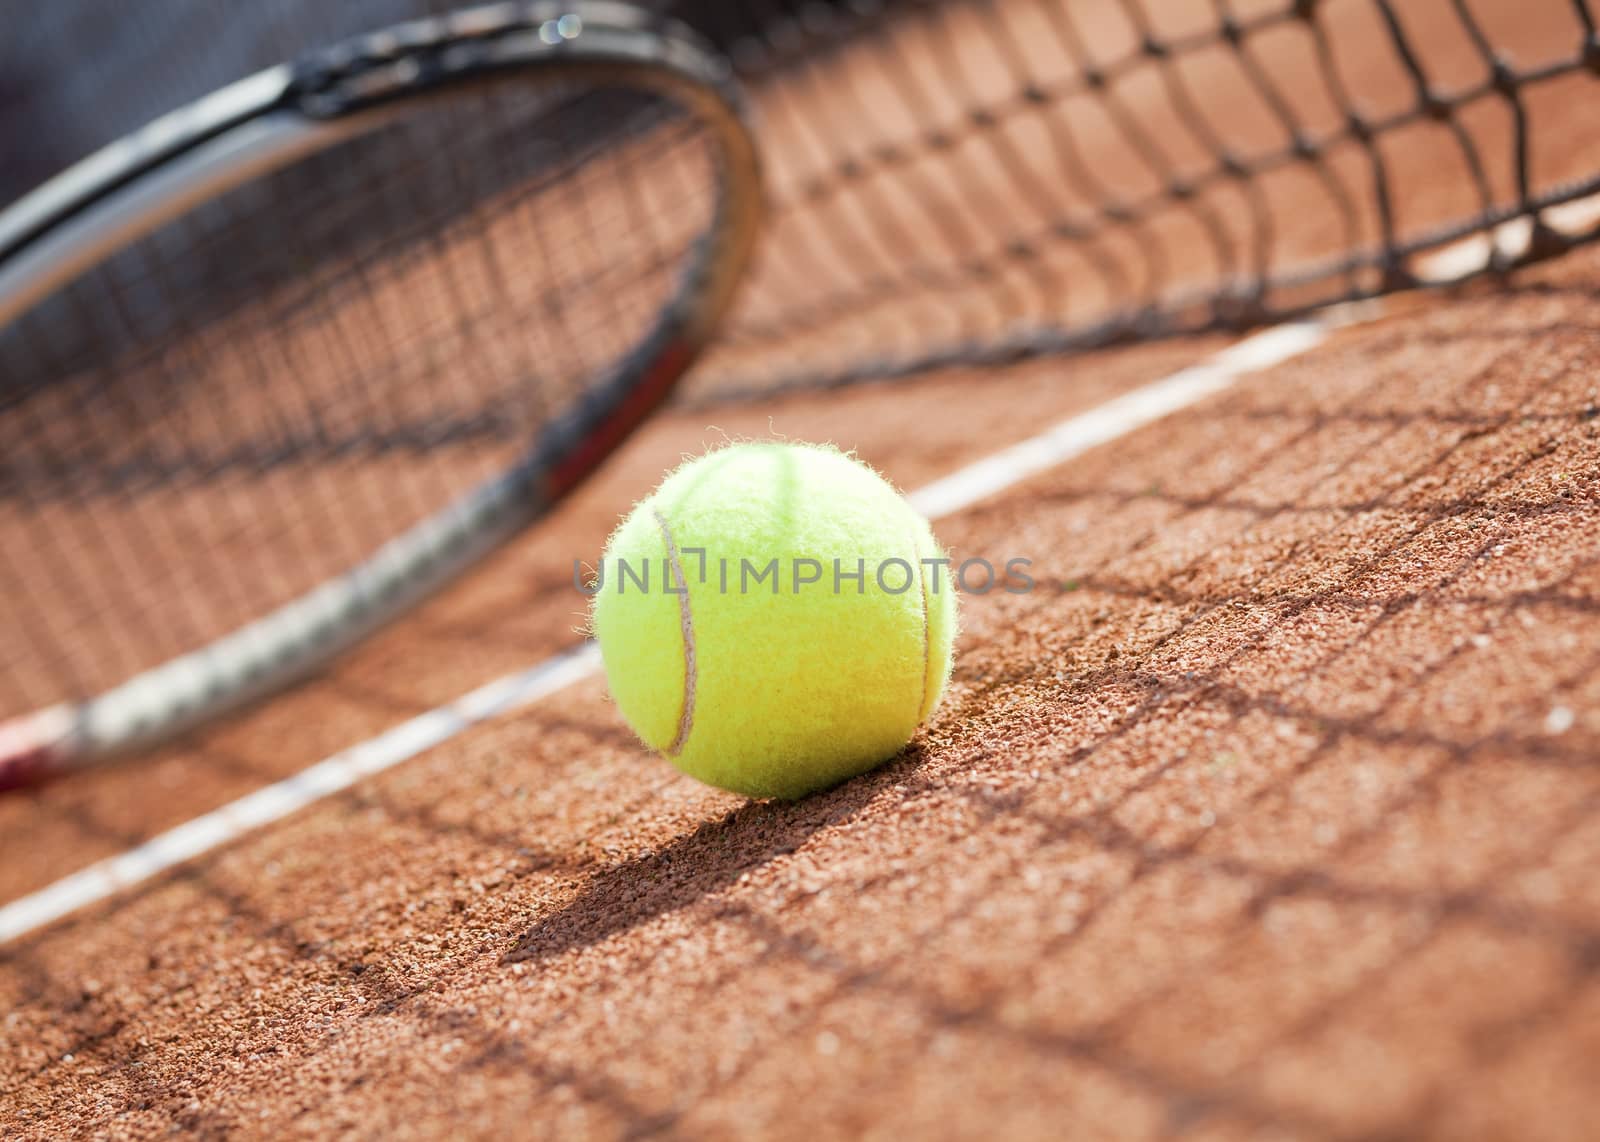 tennis background with tennis equipment on clay course